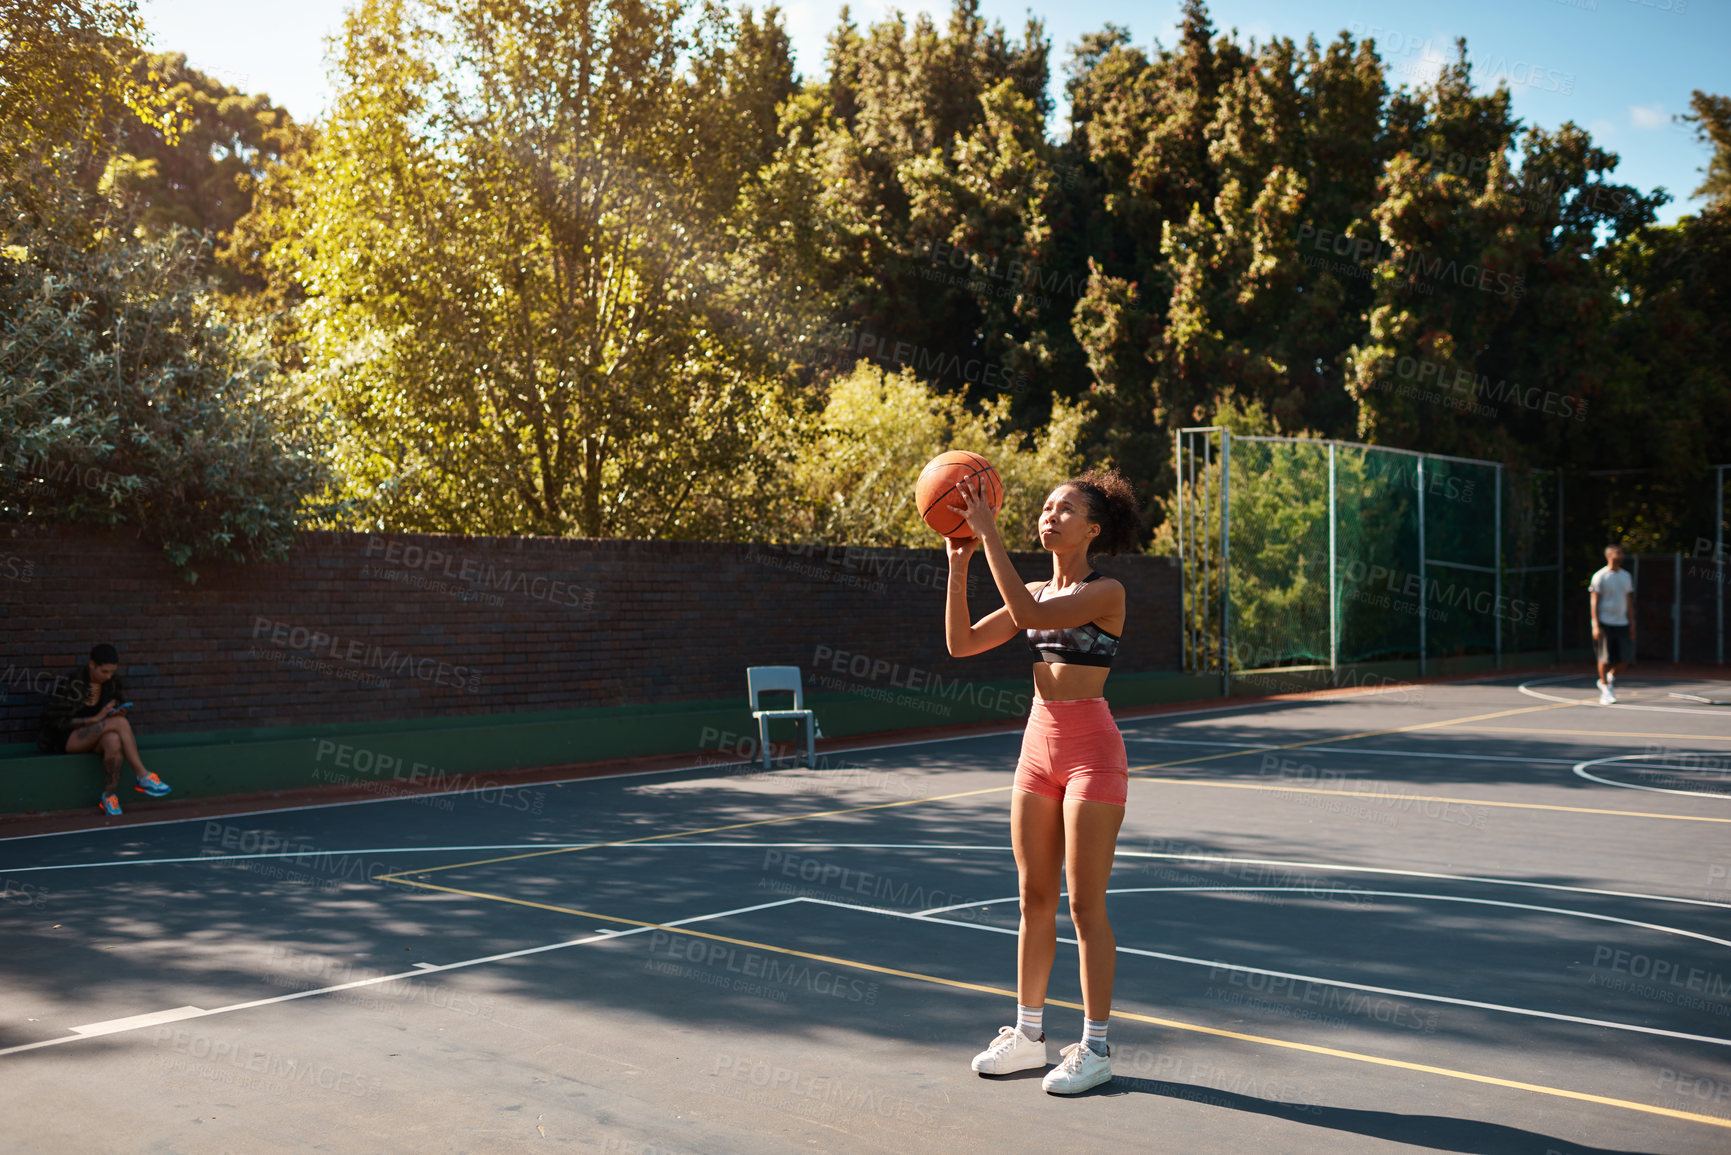 Buy stock photo Shot of a sporty young woman playing basketball on a sports court